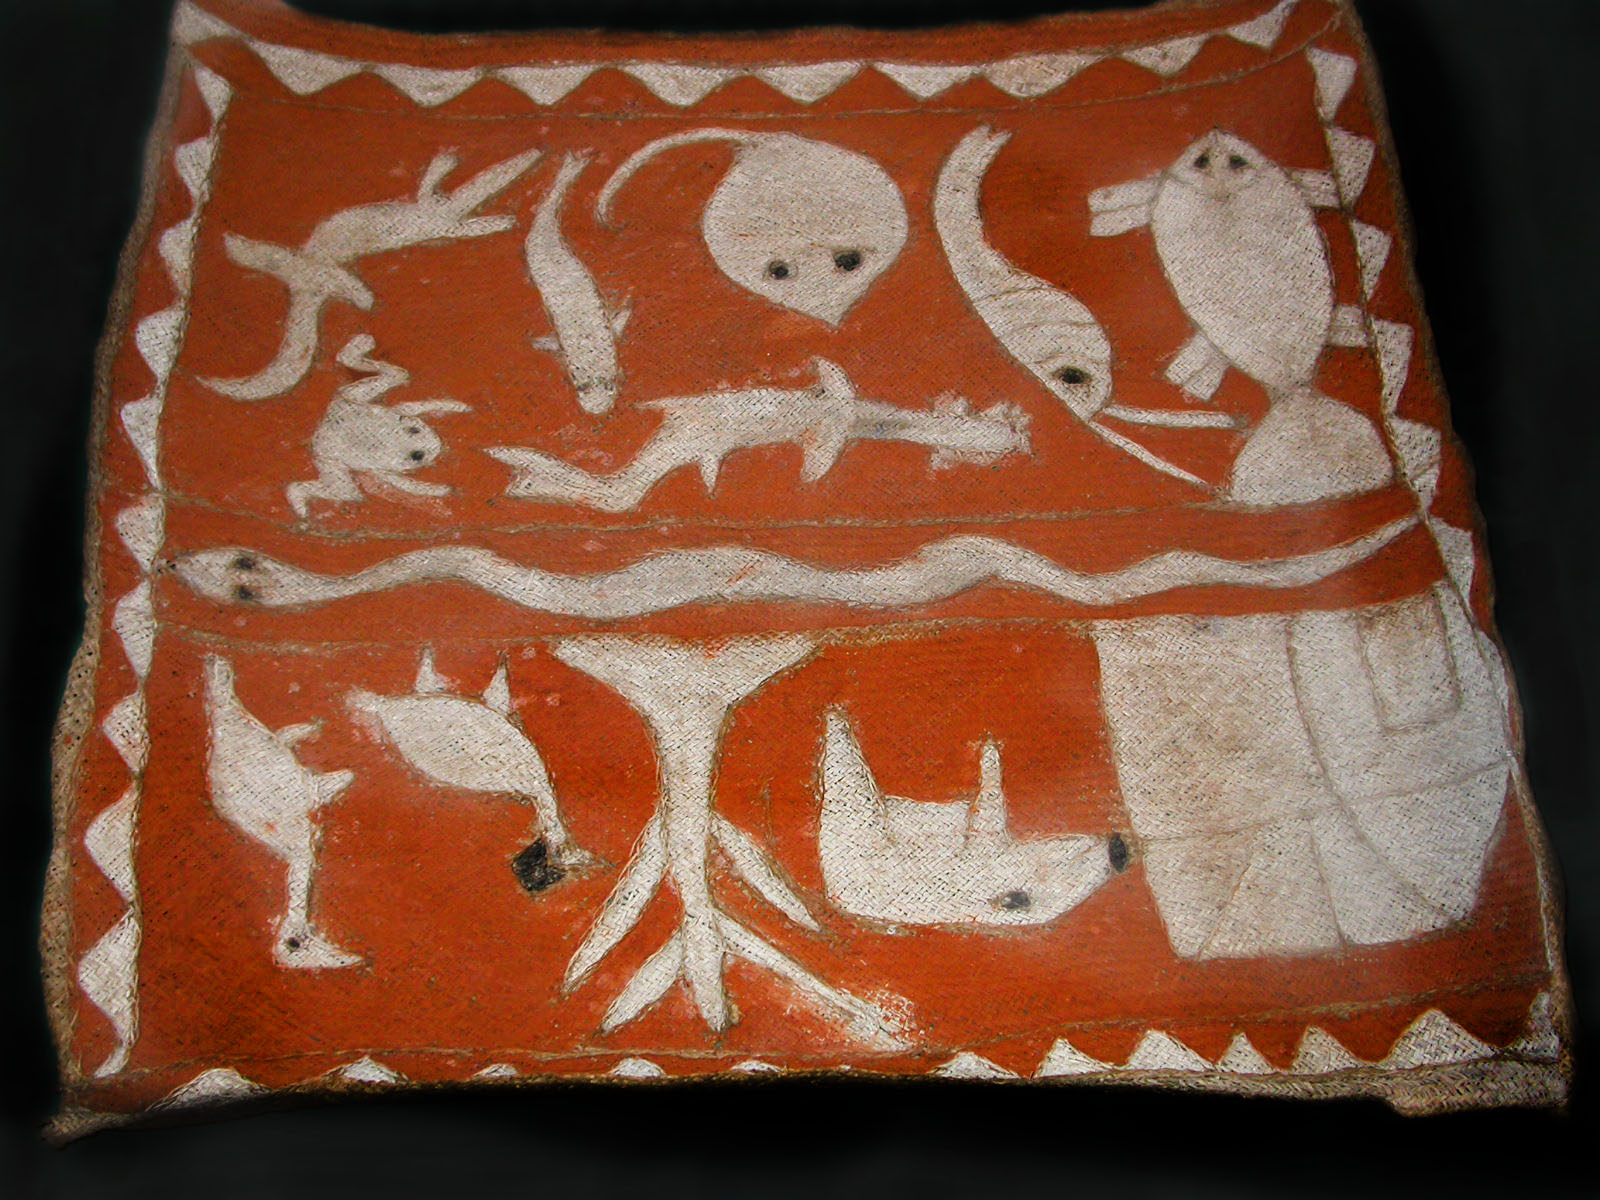 Rectangular mat made of plant fiber with designs of animals including, a wild boar, birds, eels, ray, and fish.